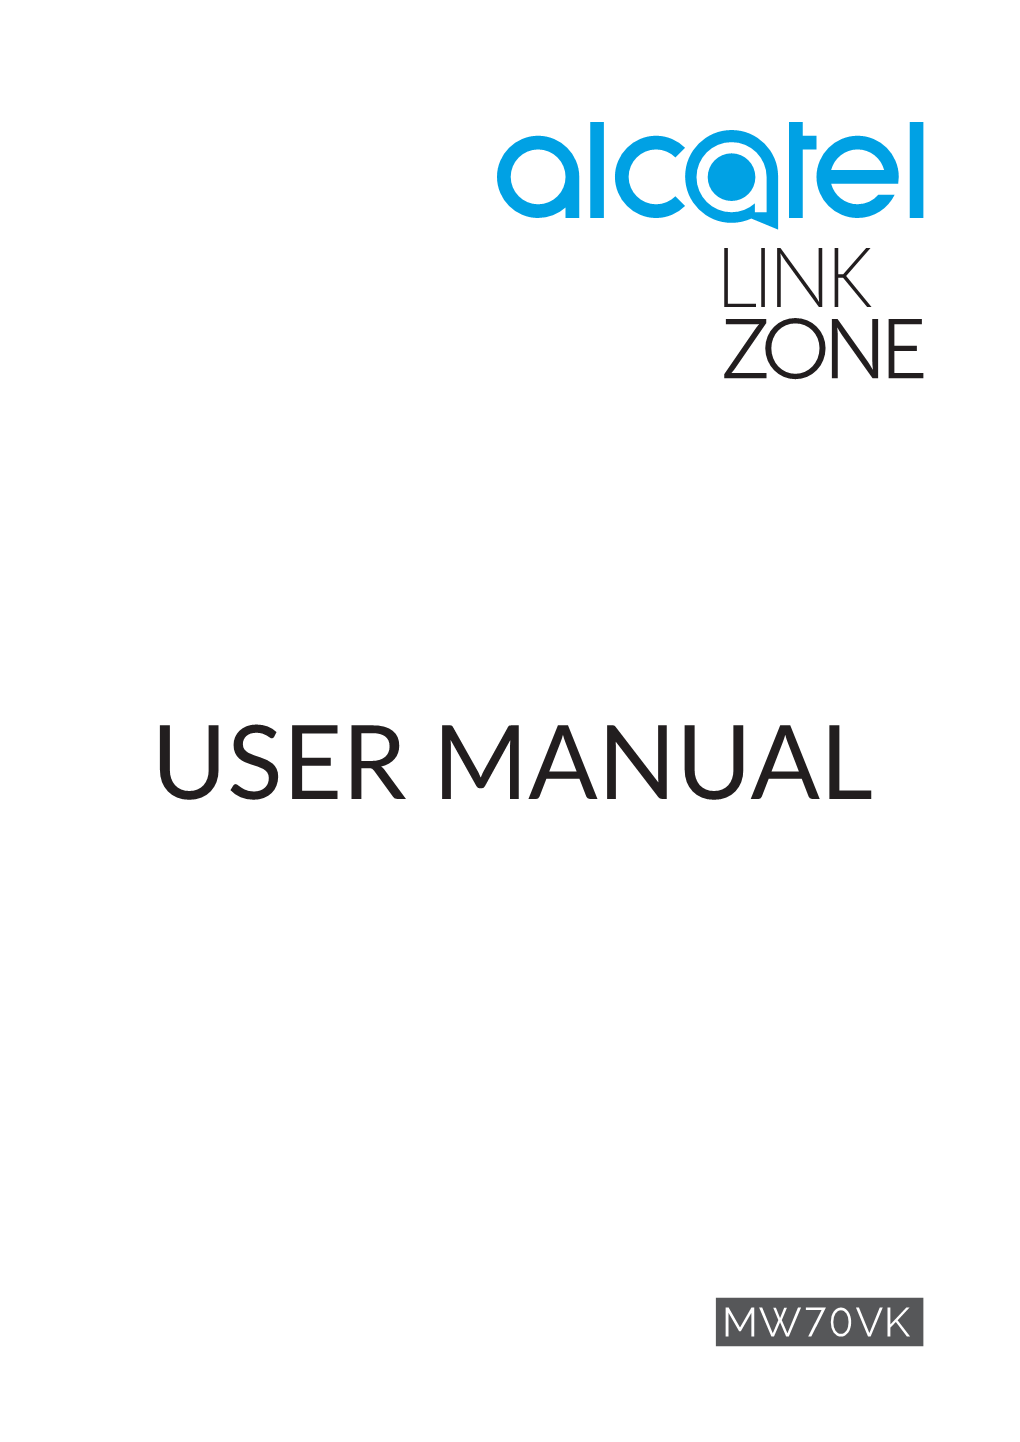 USER MANUAL Table of Contents